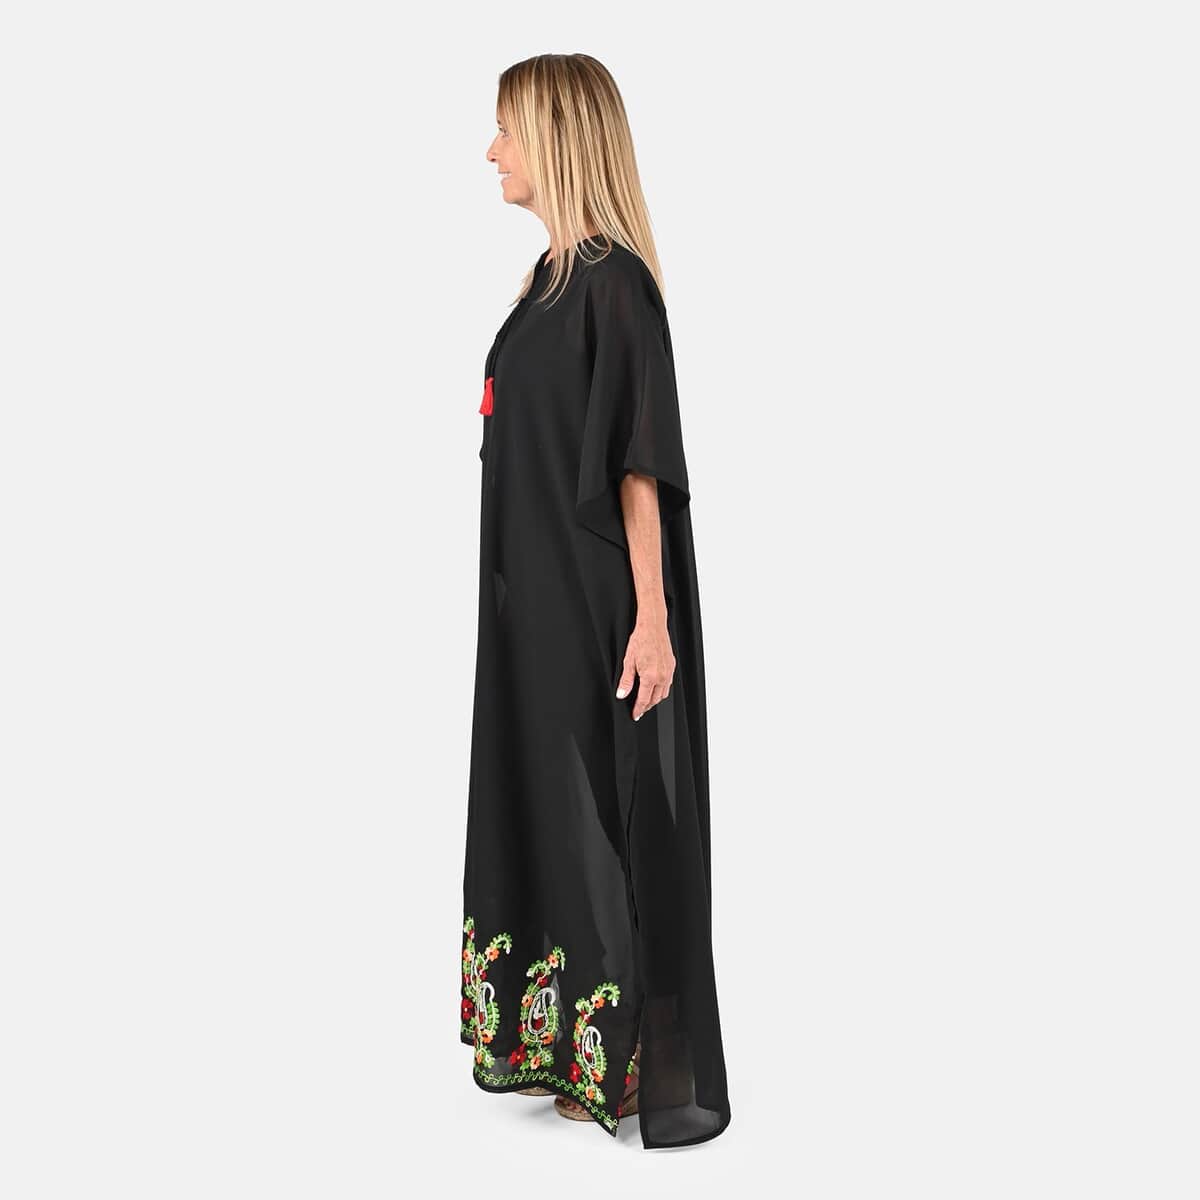 TAMSY Black Long V-Neck Mexi Kaftan with Doori & Tassels - One Size Fits Most image number 2